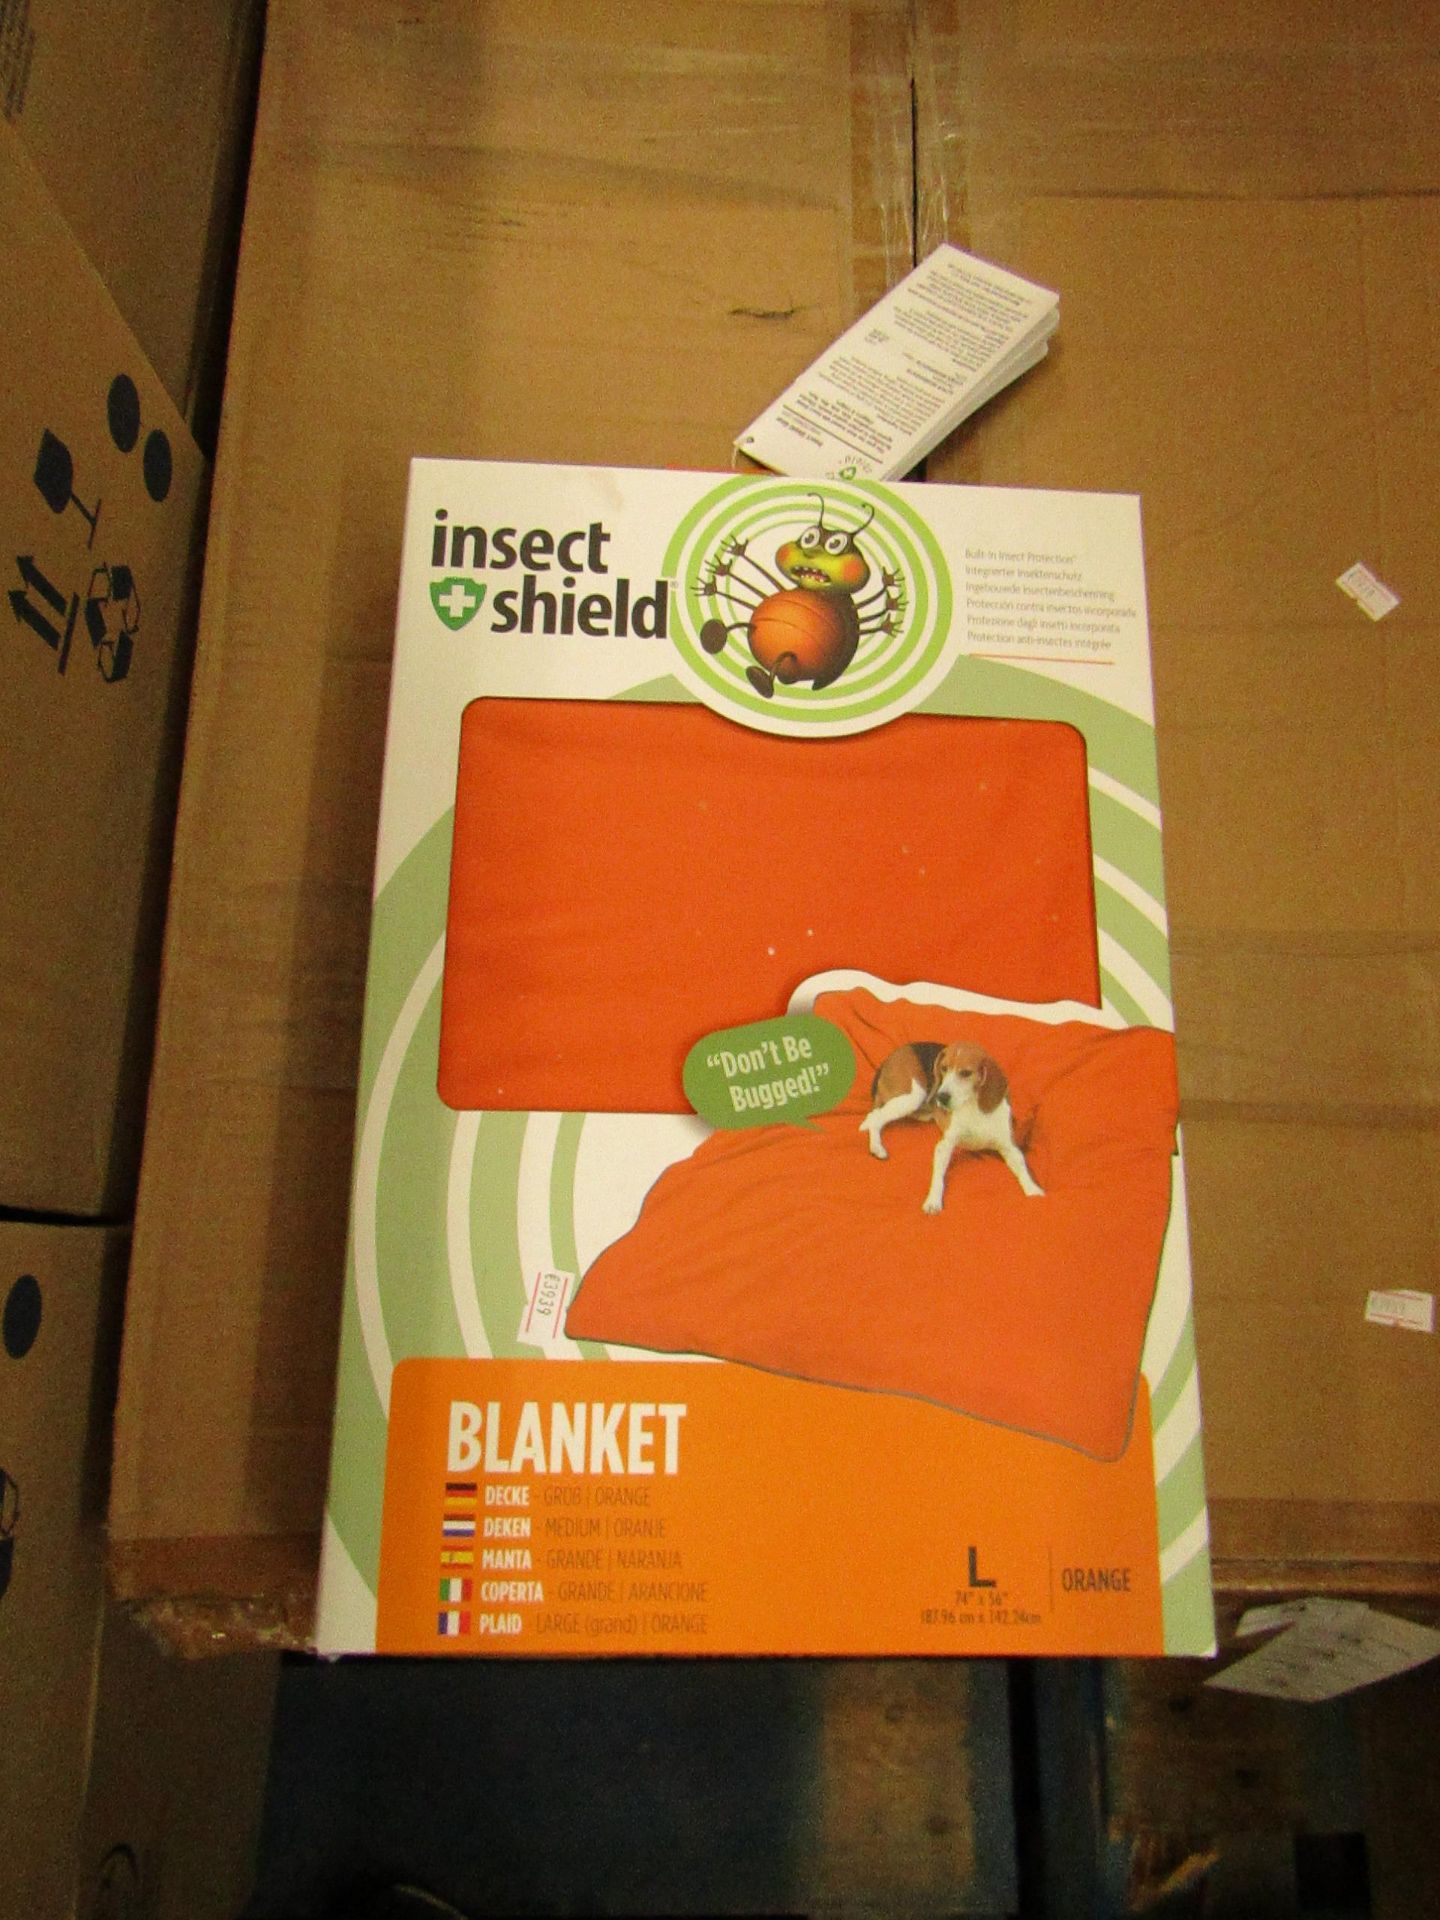 1 x Insect Shield Outdorr Protection Blanket size L 74" x 56" RRP £29.99 new & packaged